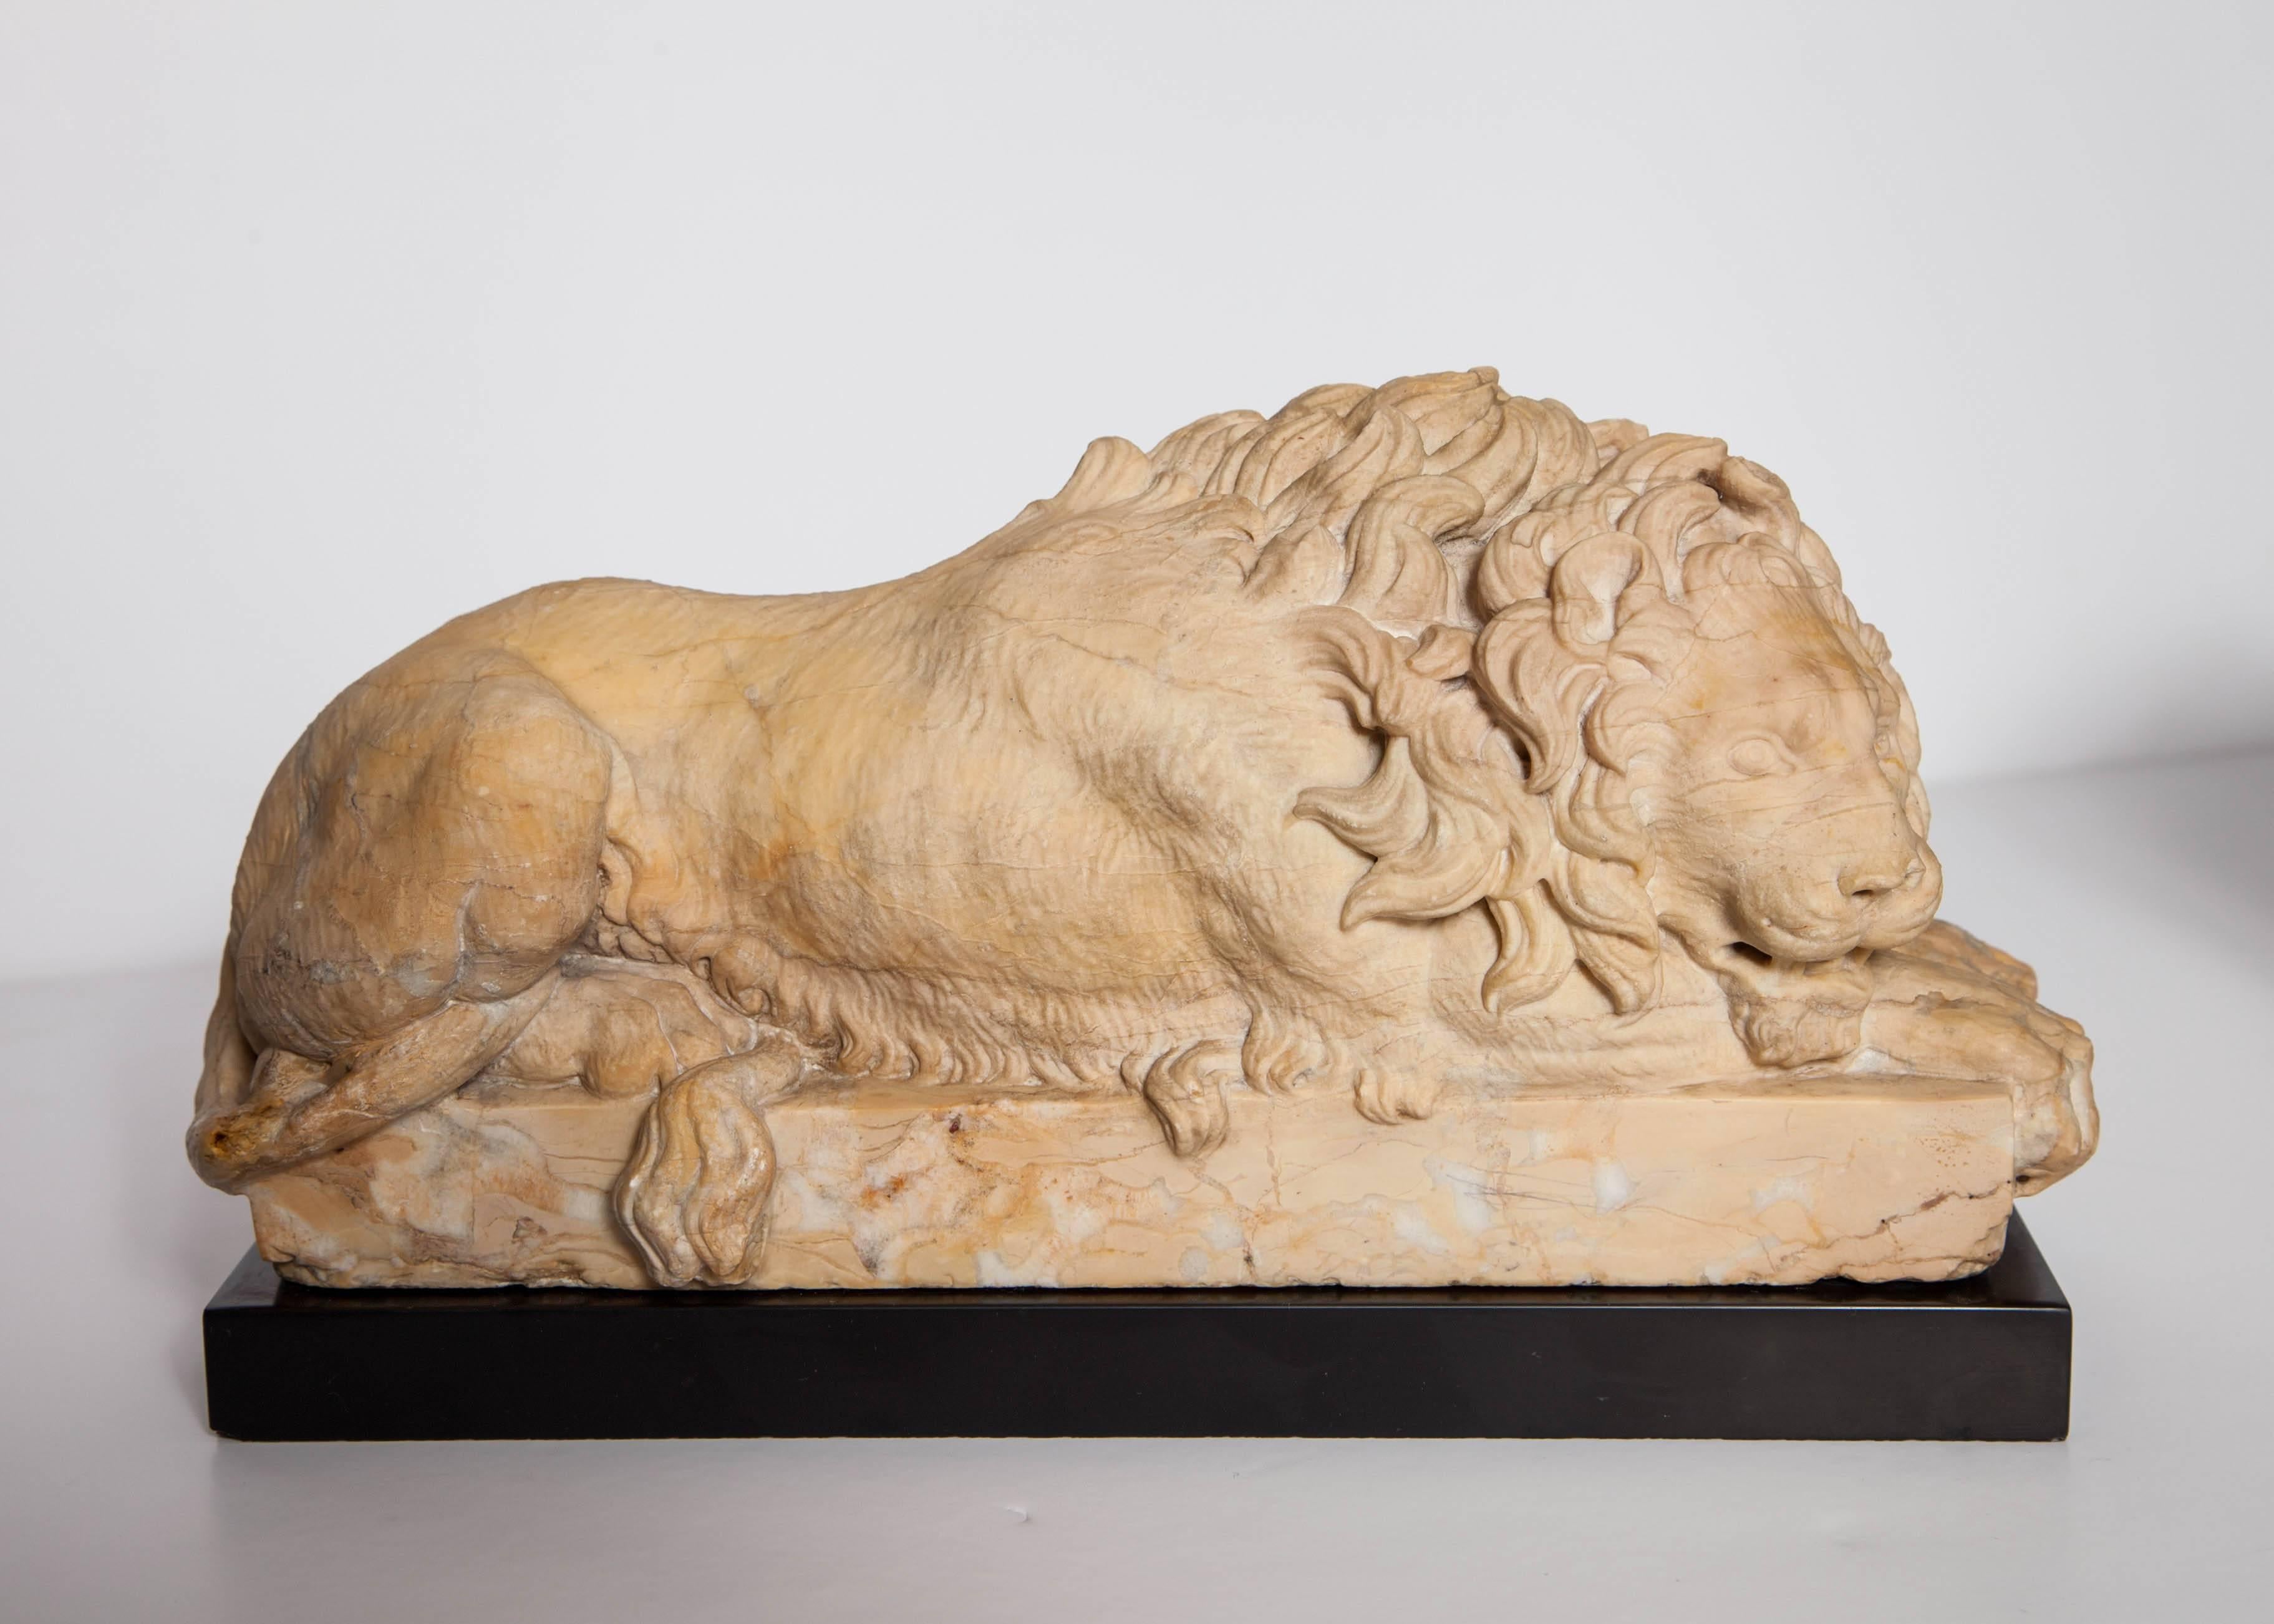 An exceptional and very fine pair of antique Grand Tour period Giallo Antico marble figures of the recumbent lions after Antonio Canova. Each mounted on a black Belgium marble plinth.
Rome, circa 1820.
Measures: L 10.5